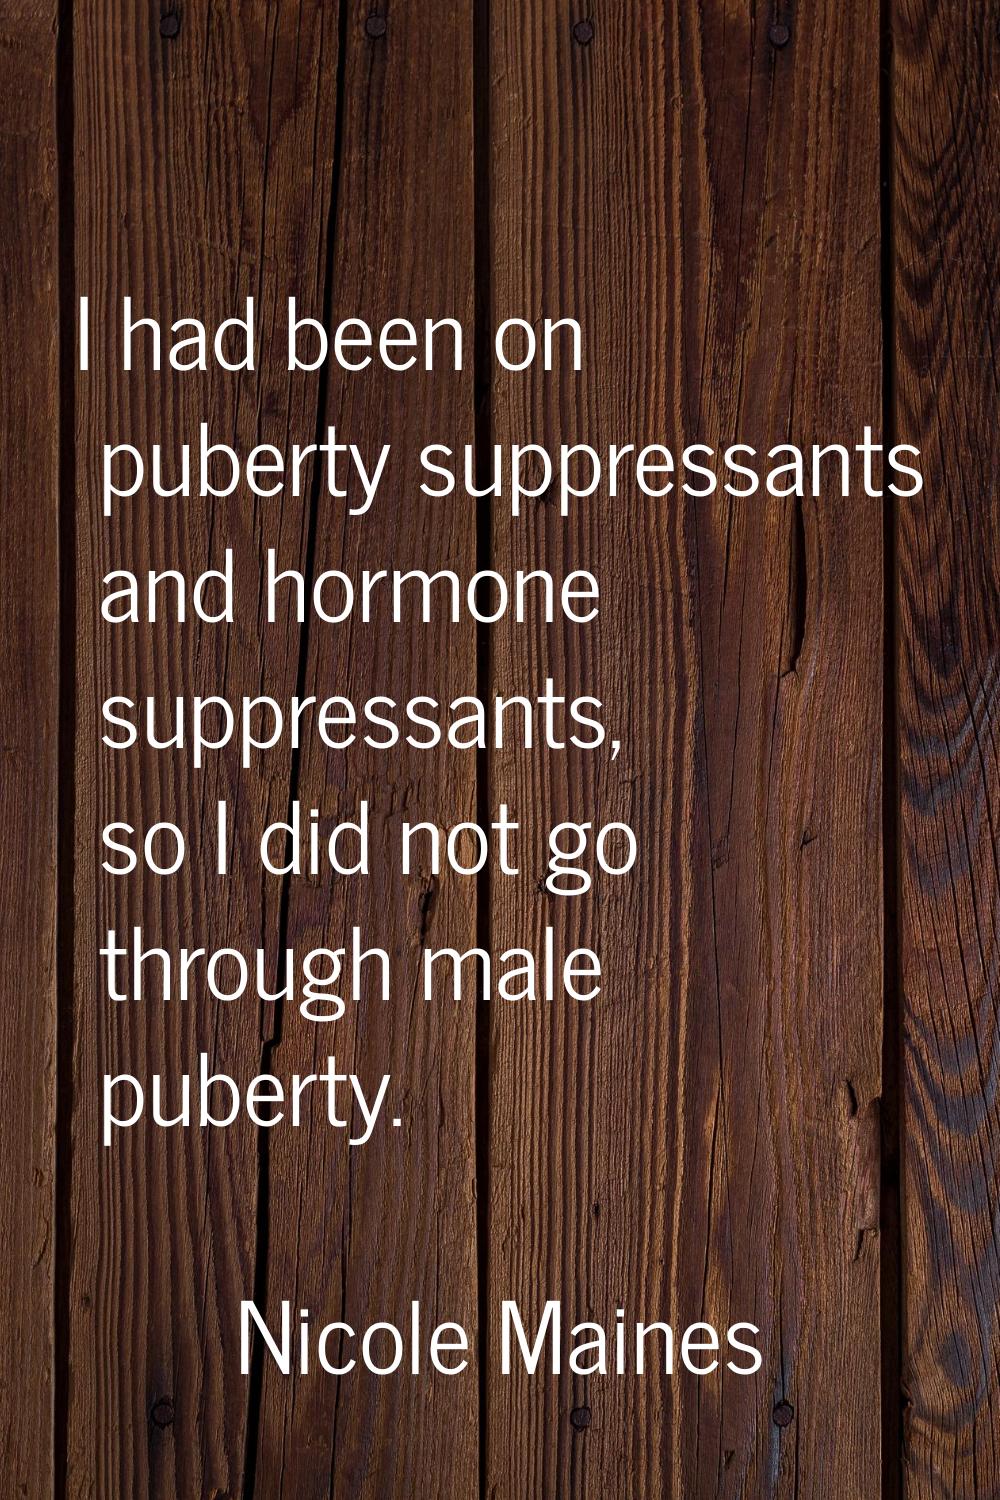 I had been on puberty suppressants and hormone suppressants, so I did not go through male puberty.